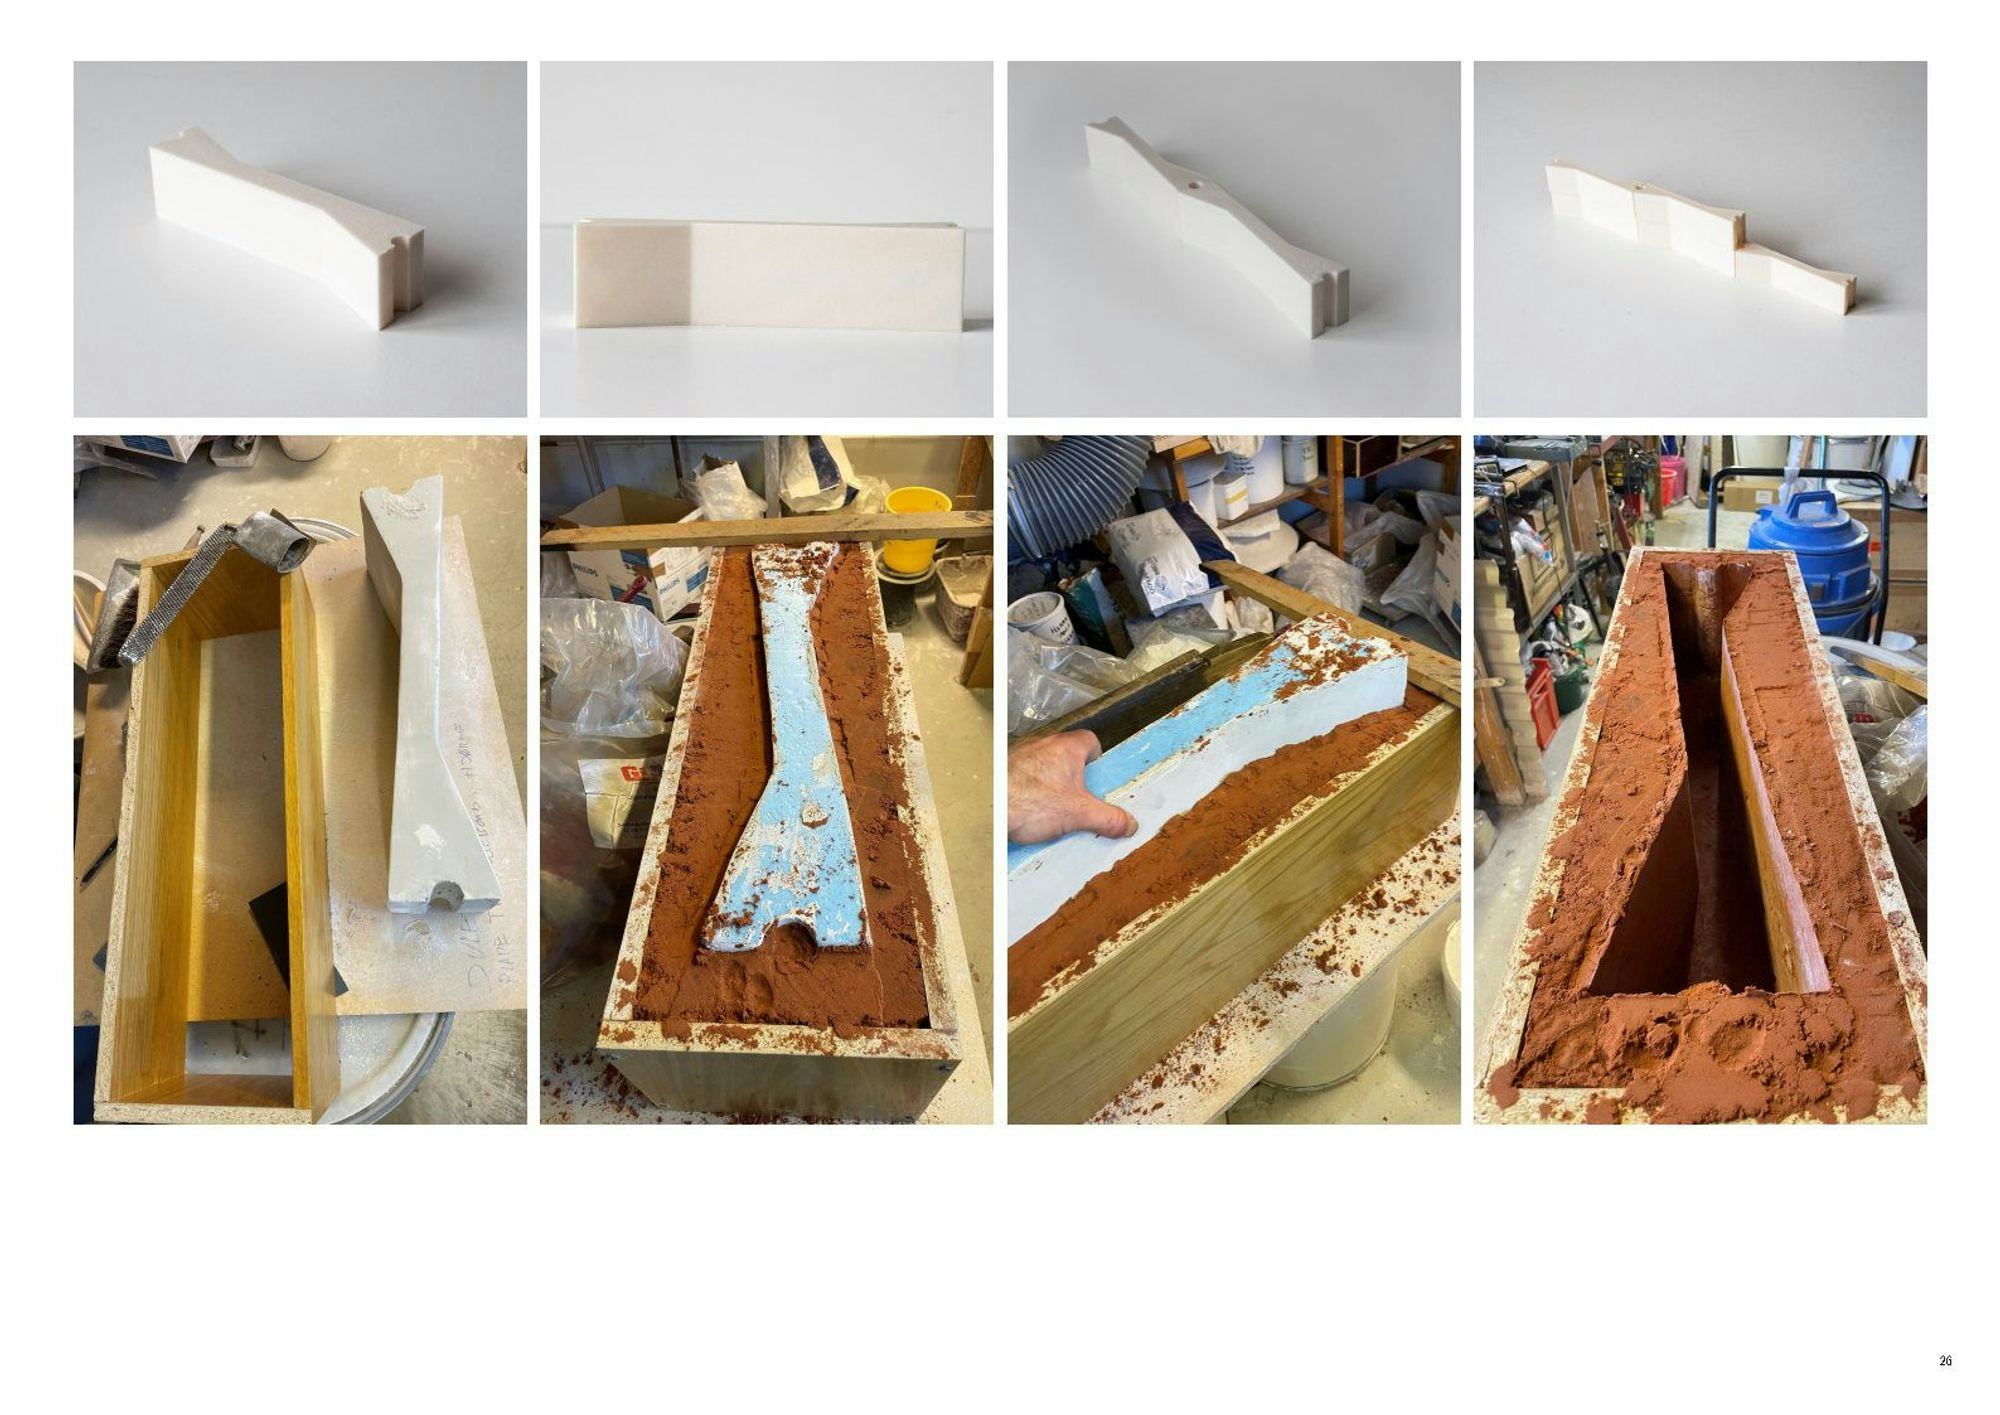 A collage of images showing different stages of molding process